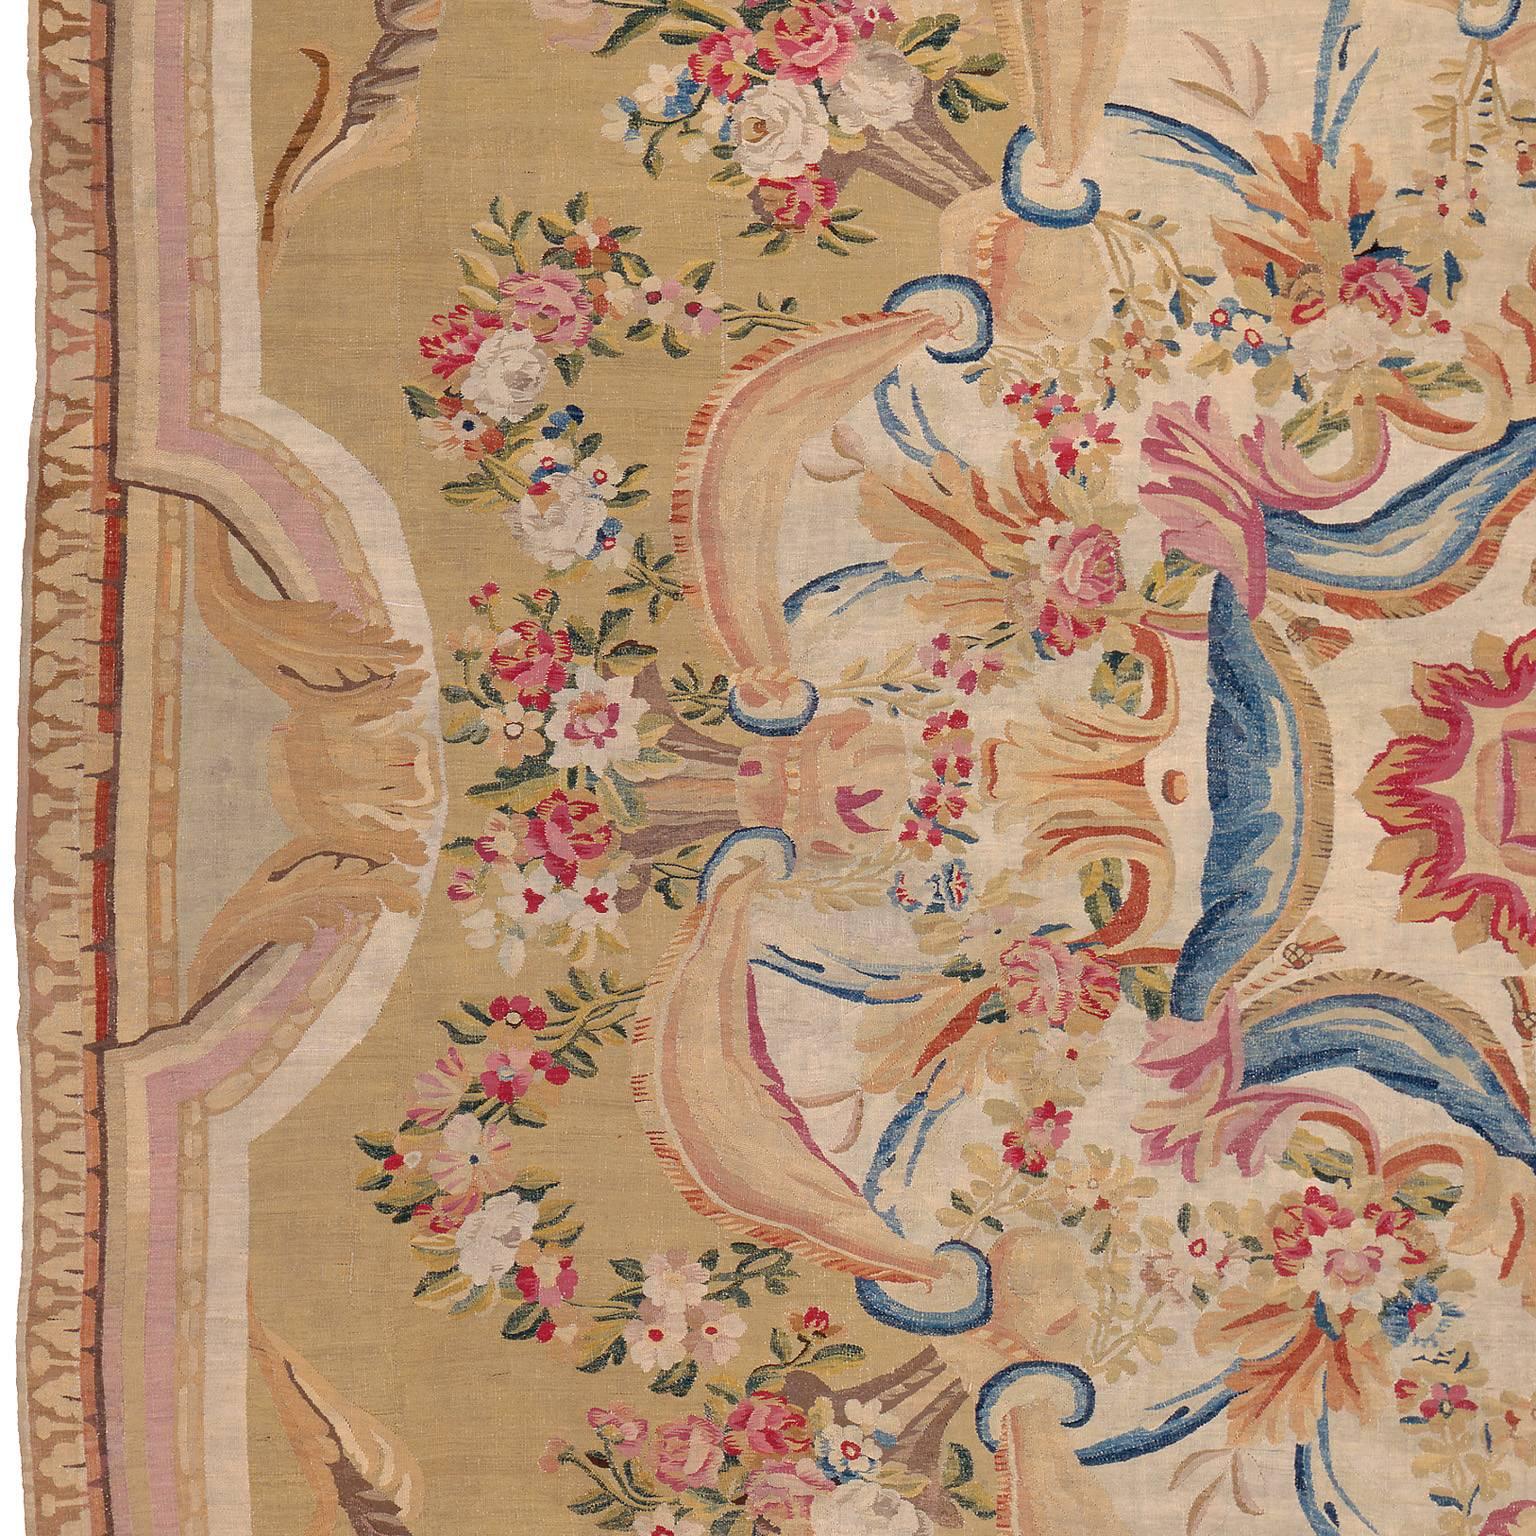 Hand-Woven French Aubusson Rug, 1770